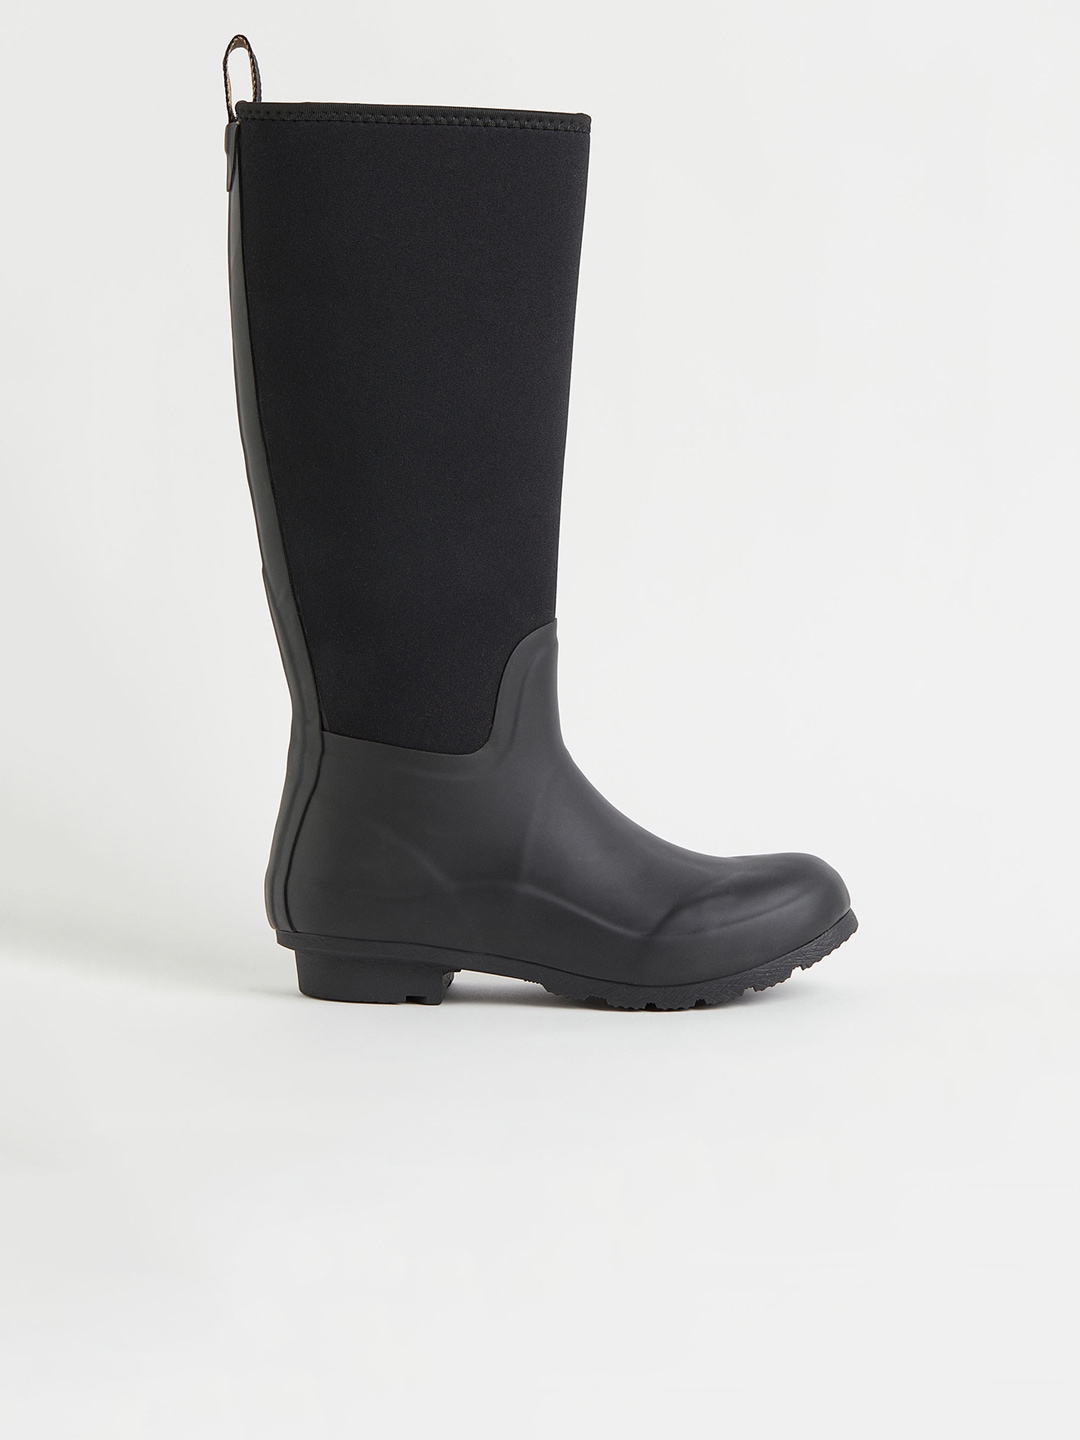 H&M Women Black Knee Length Boots Price in India